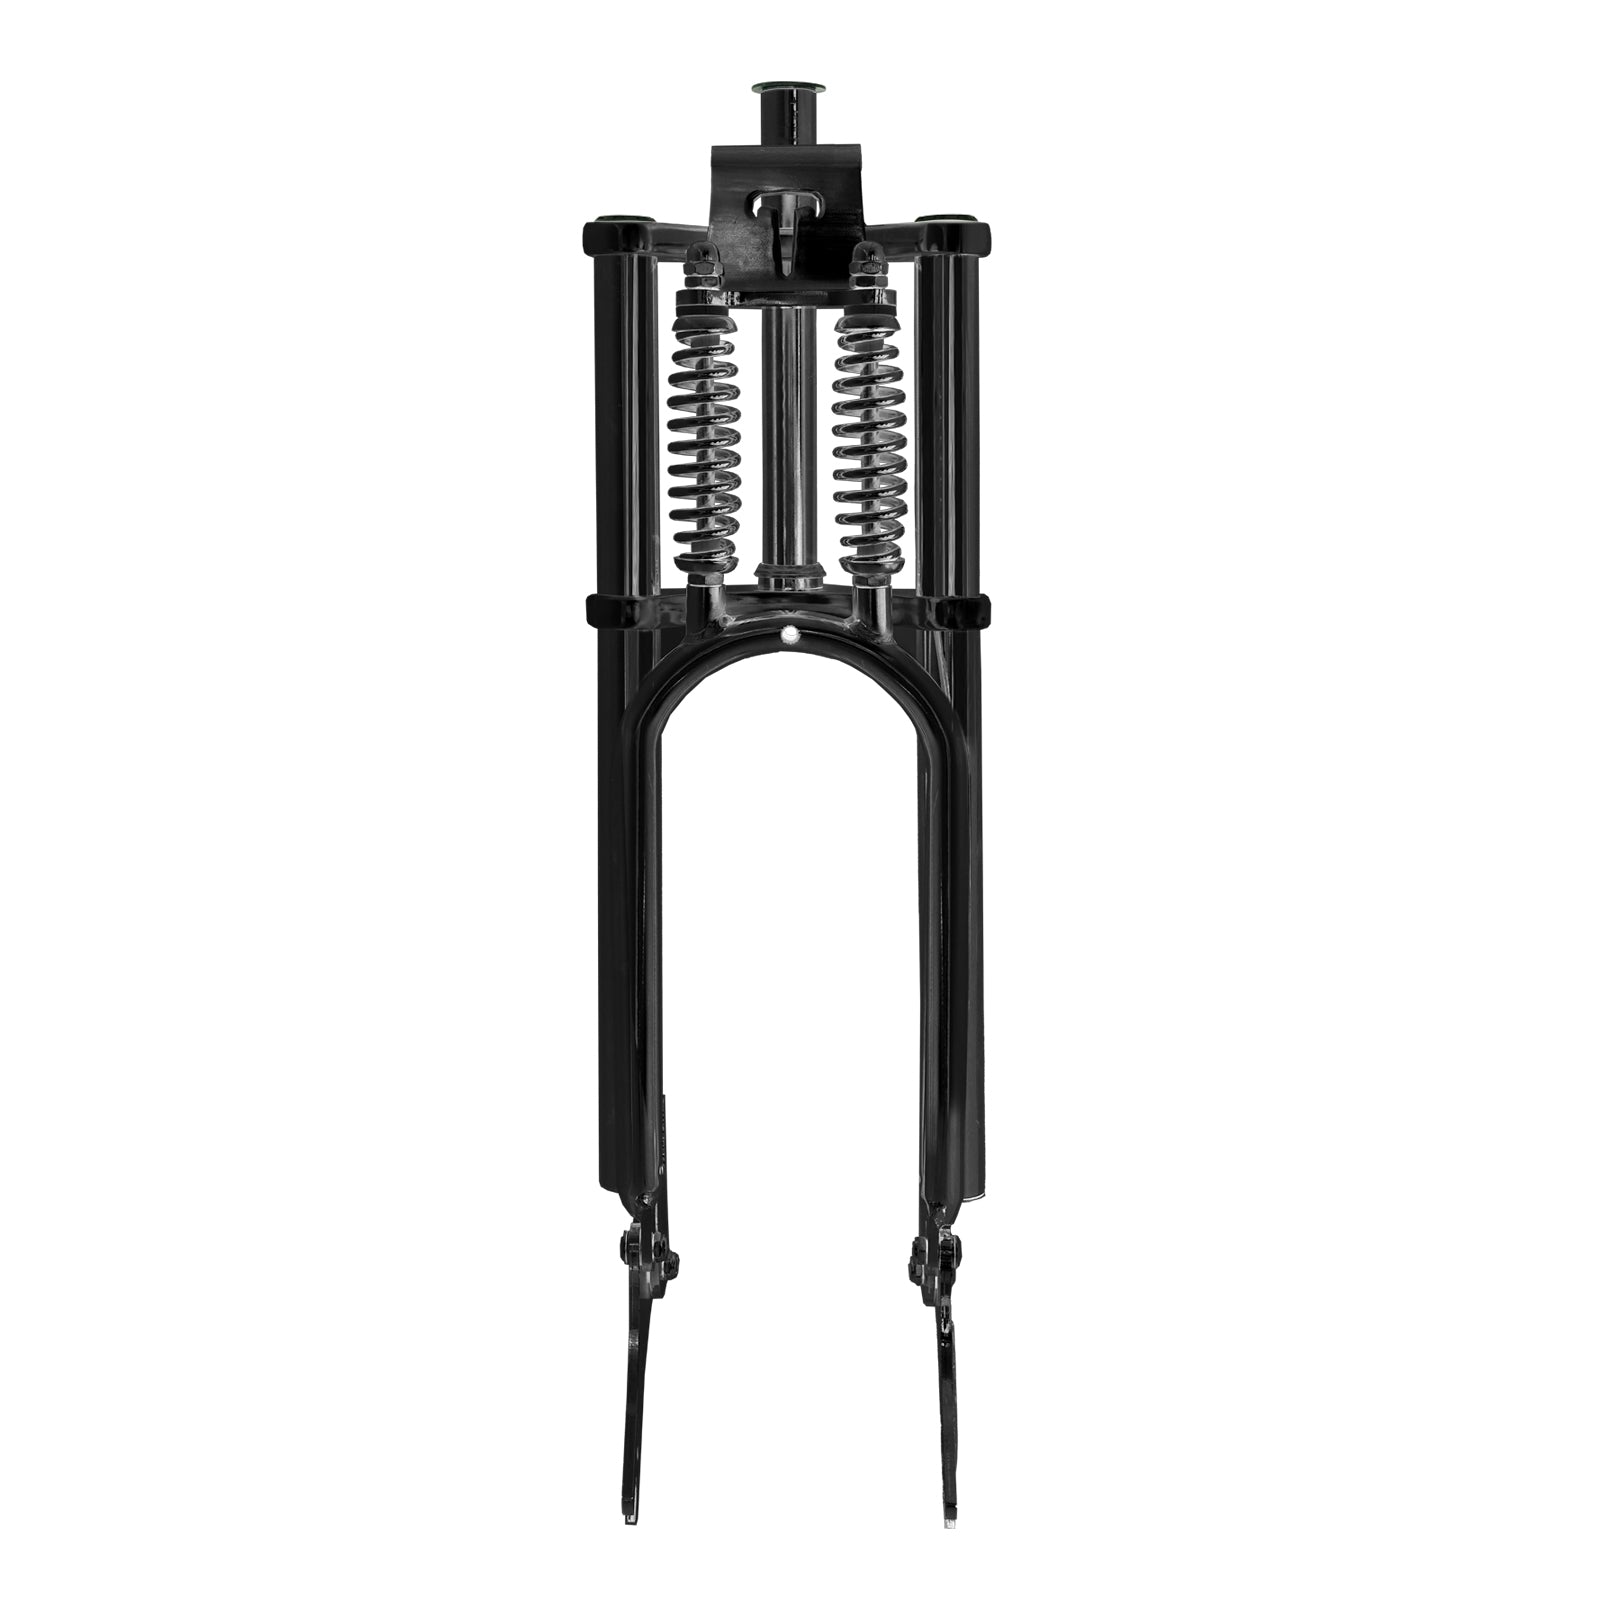 Tracer FK-GT26263145D8 26" Triple Tree Deluxe Dual Spring Classical Fork for Disc Brake 1-1/8 (28.6mm)